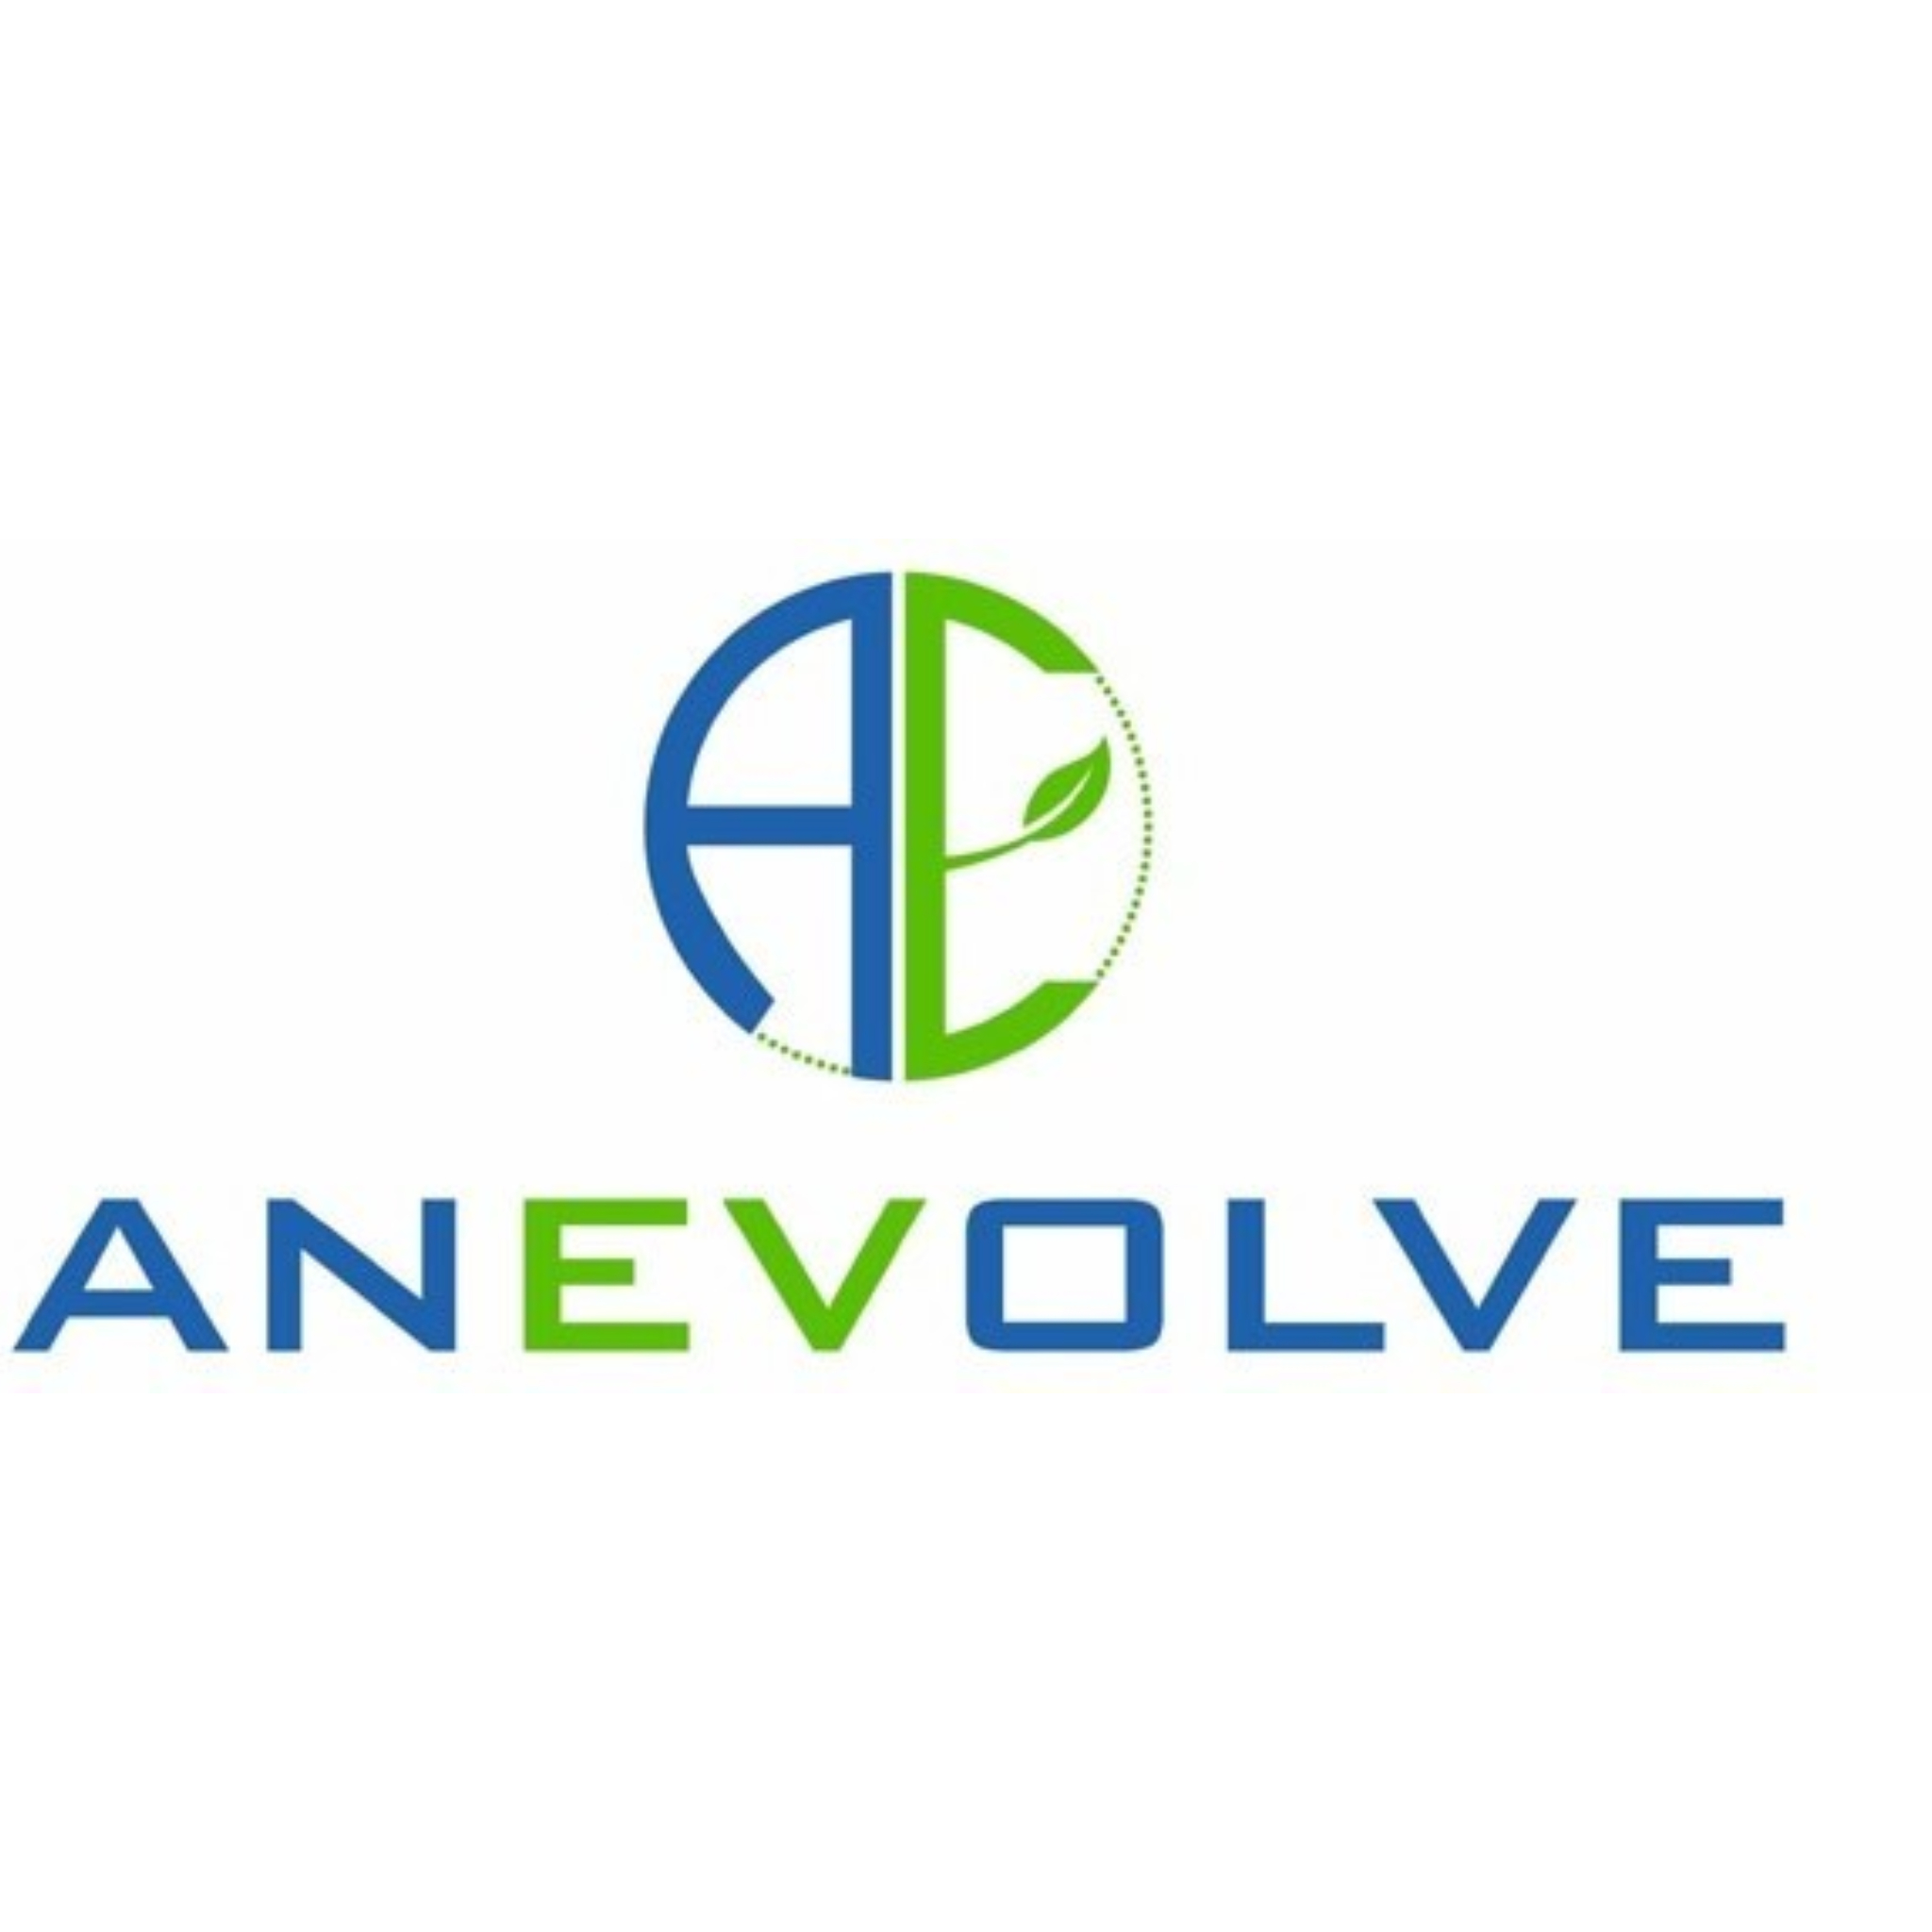 ‘ANEVOLVE’, a platform for green tech and clean mobility solutions, announced by Anjali and Jaisal Singh to complement the ANAND Group-thumnail